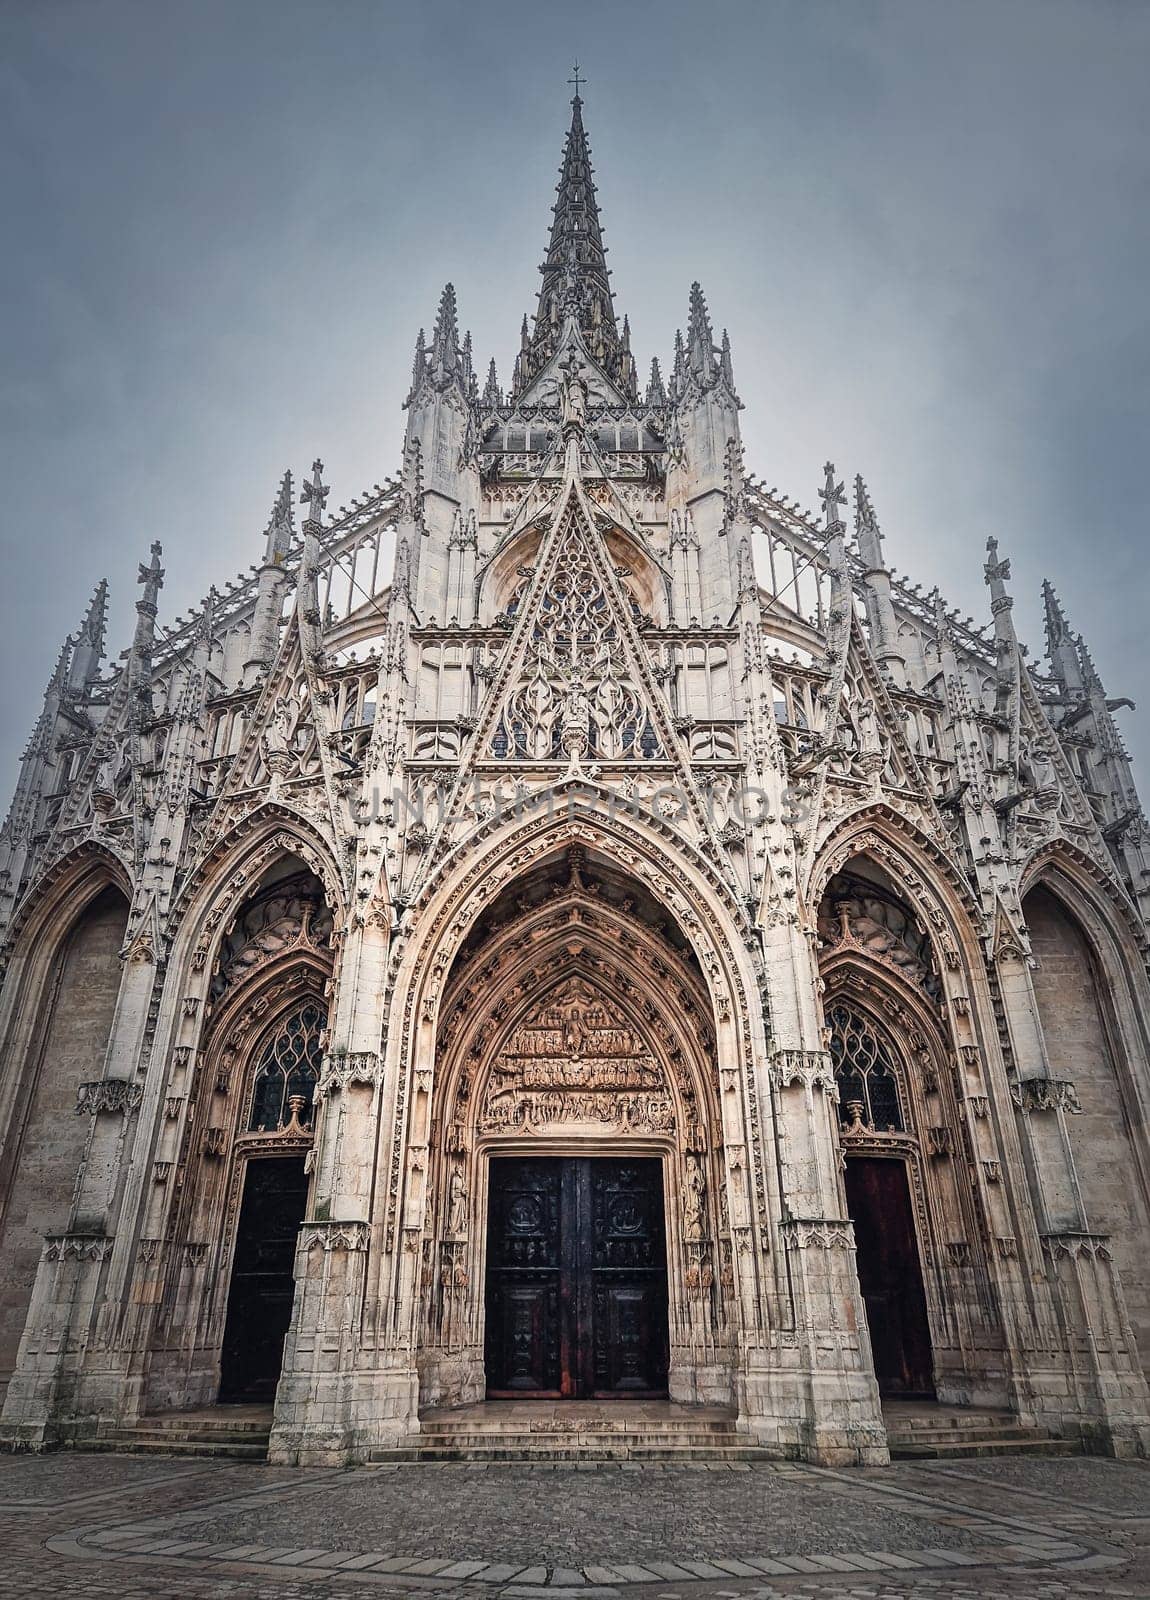 Outdoor facade view of Saint Maclou Church of Rouen in Normandy, France. Flamboyant gothic architectural style by psychoshadow